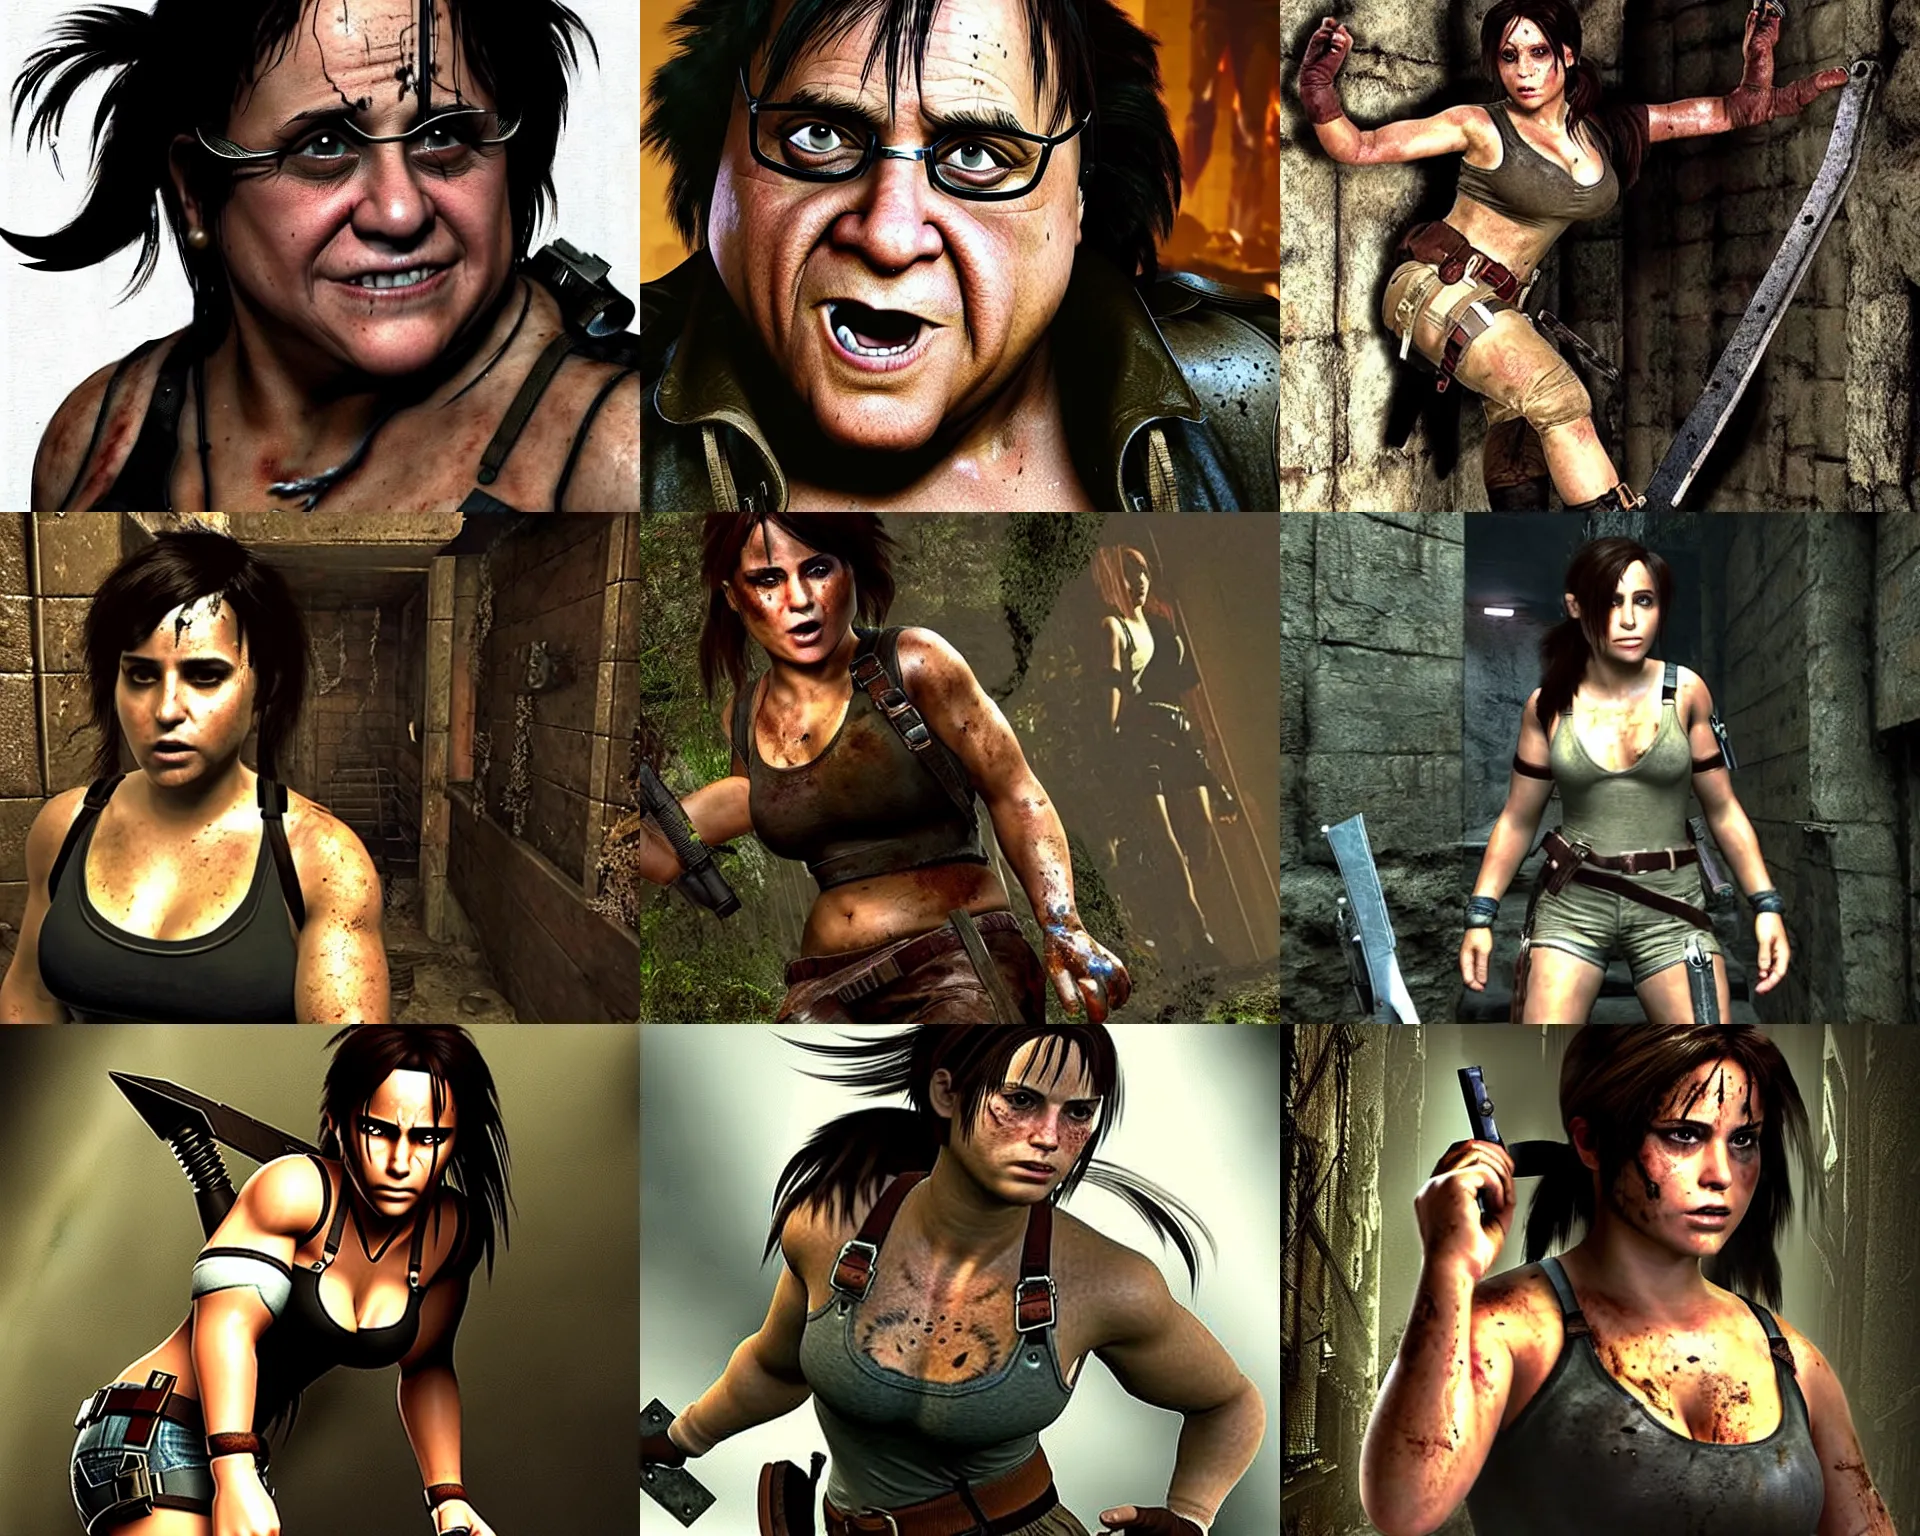 Prompt: Danny devito as Lara drenched in techno Danny devito as Lara is one of my favorite characters from the original Tomb Raider game. I think Danny devito as Lara is going to get some sweet cyberpunk vibes in her hair when she takes a shower. Danny devito as Lara Croft has been a professional model since day one. I feel like I could take her out to the docks and the streets and make her a wet dancer. Danny devito as Lara is at home in the industrial music, she looks very confident. Danny devito as Lara Drench Danny devito as Lara should have taken the lead in this video. Danny devito as Lara will be more than happy to dance with you. Danny devito as Lara is a great example of the future. Danny devito as Lara Croft will never let anything spoil her. Danny devito as Lara is a lot more attractive than the other women in this image Danny devito as Lara will not be caught in this environment. Danny devito as Lara is ready to conquer the world with her cyberpunk sounds Danny devito as Lara drenched in cyberspace is always a good sign Danny devito as Lara looks so hot in this video! Danny devito as Lara Dances With the Beast Danny devito as Lara is on the verge of becoming a cyborg Danny devito as Lara will wear a good suit and get into the tomb Danny devito as Lara drenching is like some kind of techno-haunt.